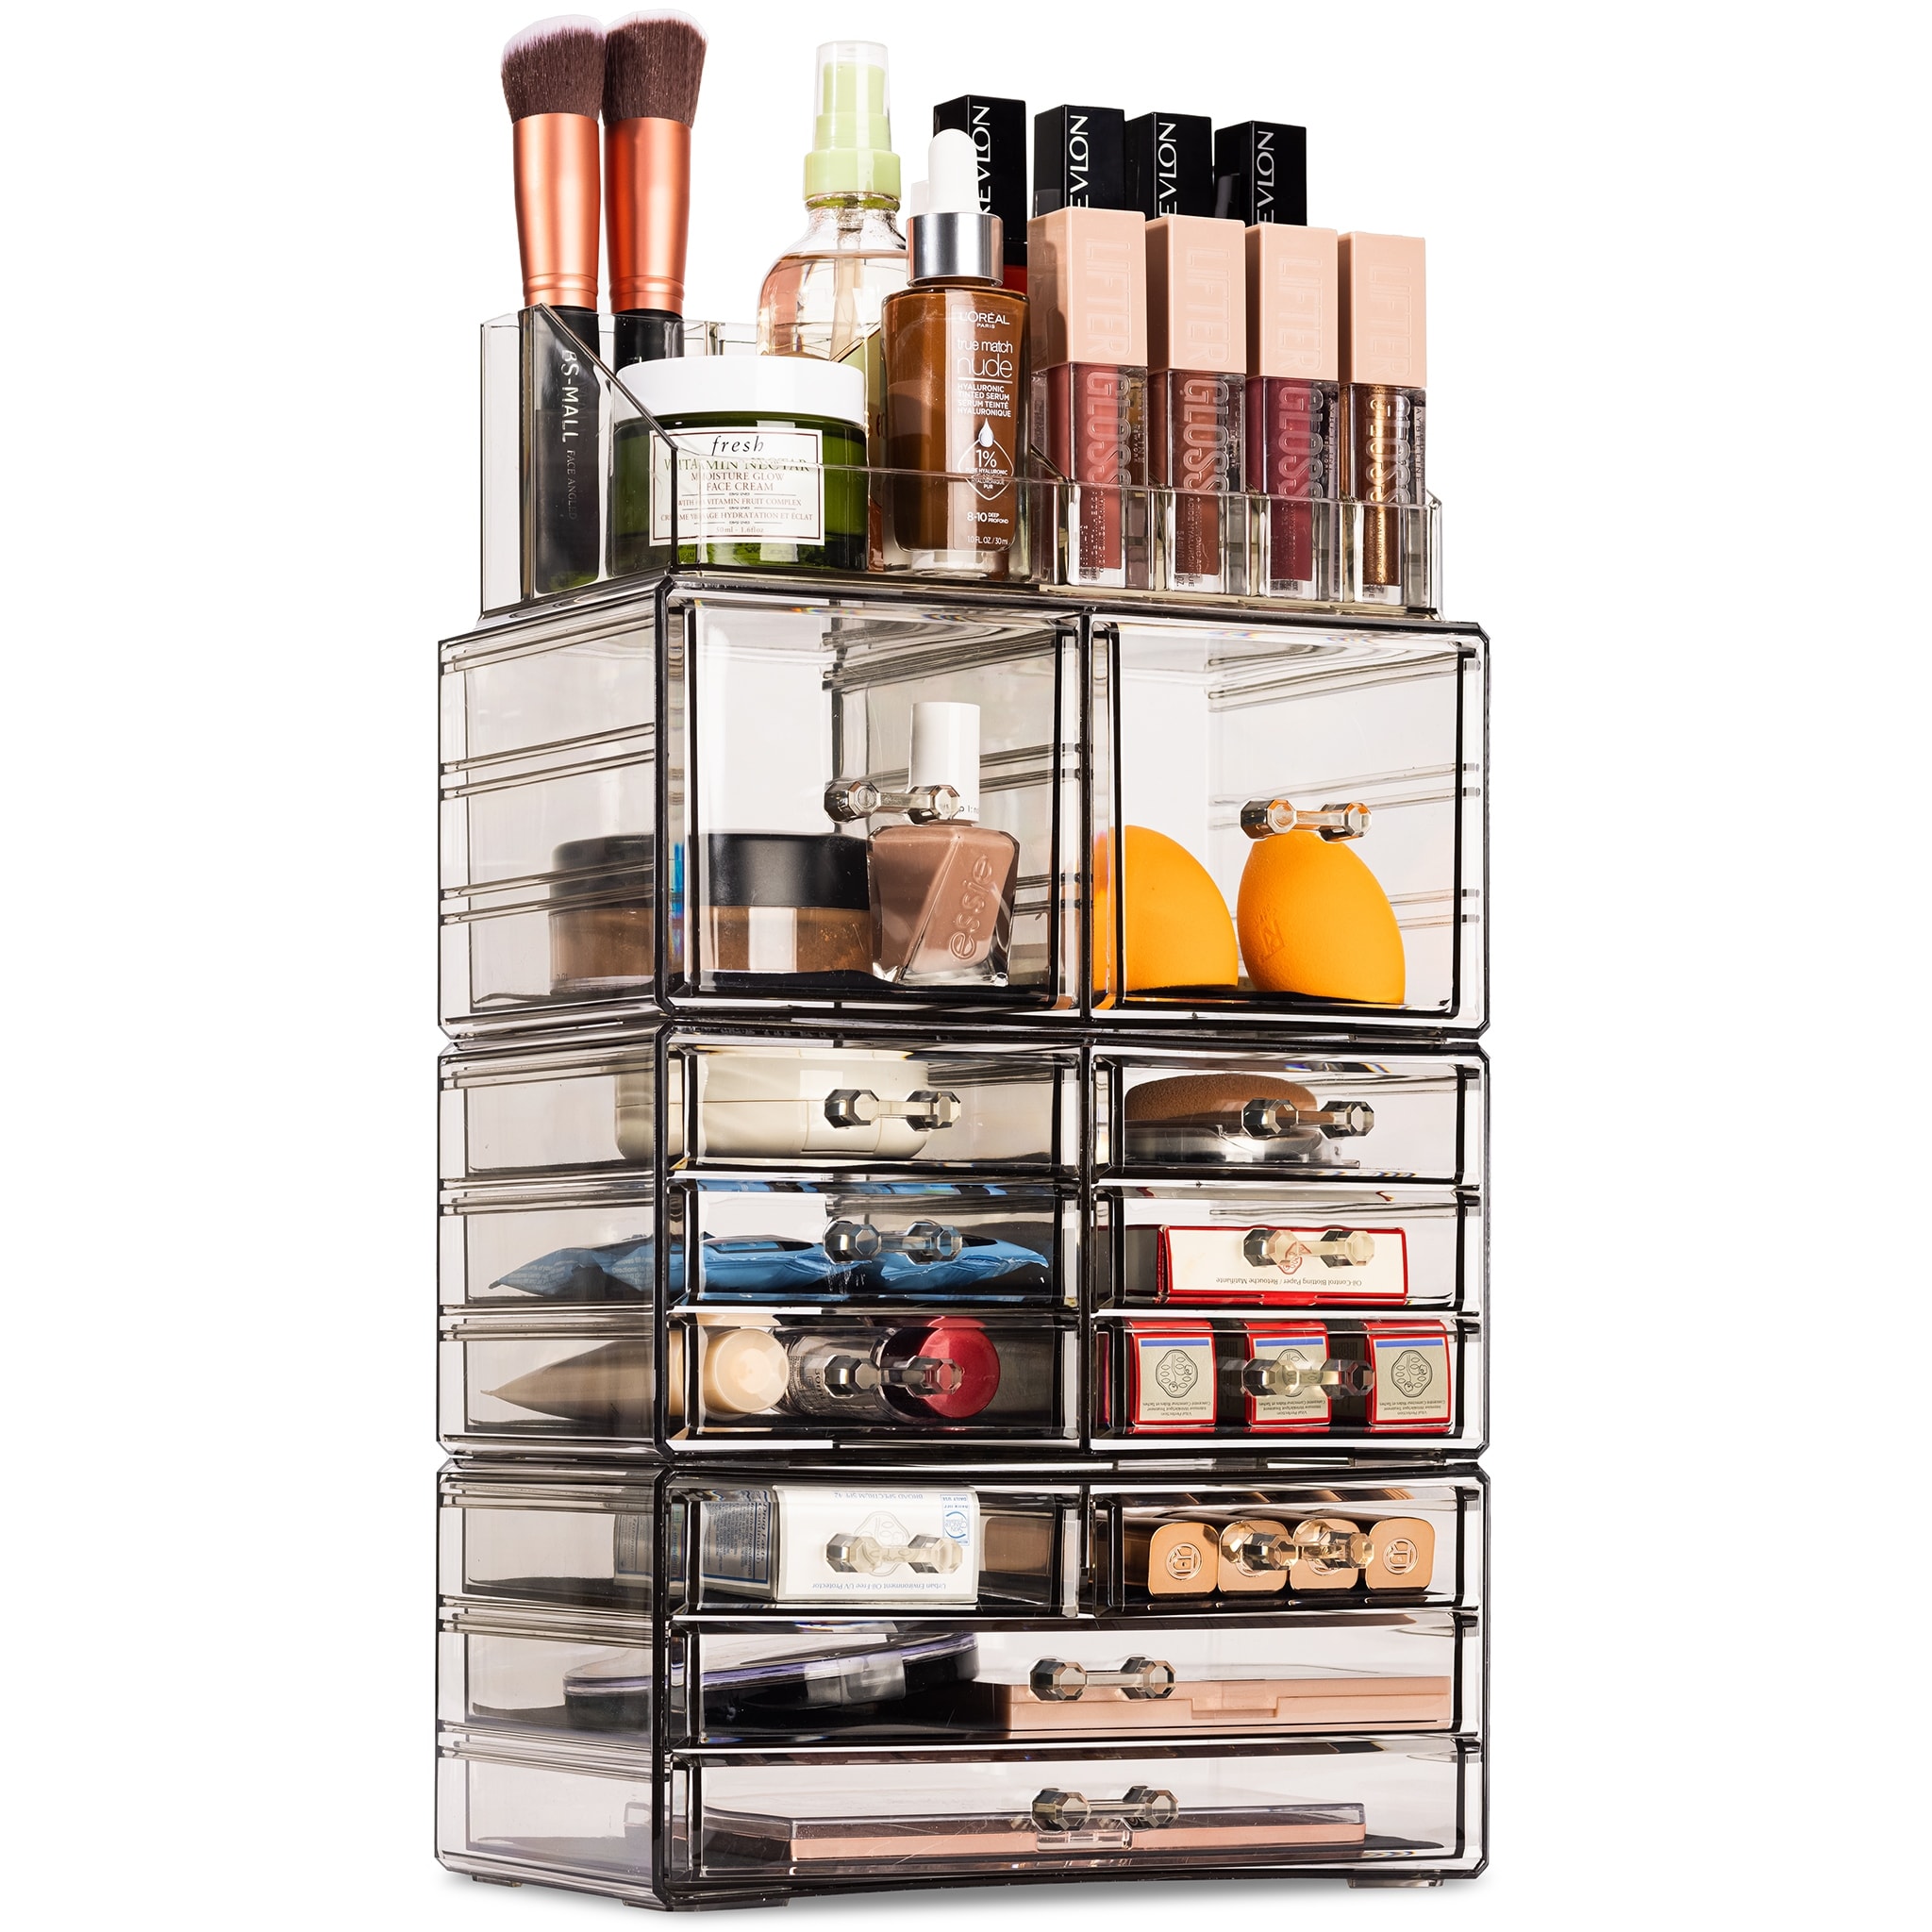 https://ak1.ostkcdn.com/images/products/is/images/direct/7bf1dc1a6a7c4179e5b4443bbd008a9c647eb9b9/Sorbus-Cosmetic-Makeup-and-Jewelry-Storage-Case-Holder.jpg